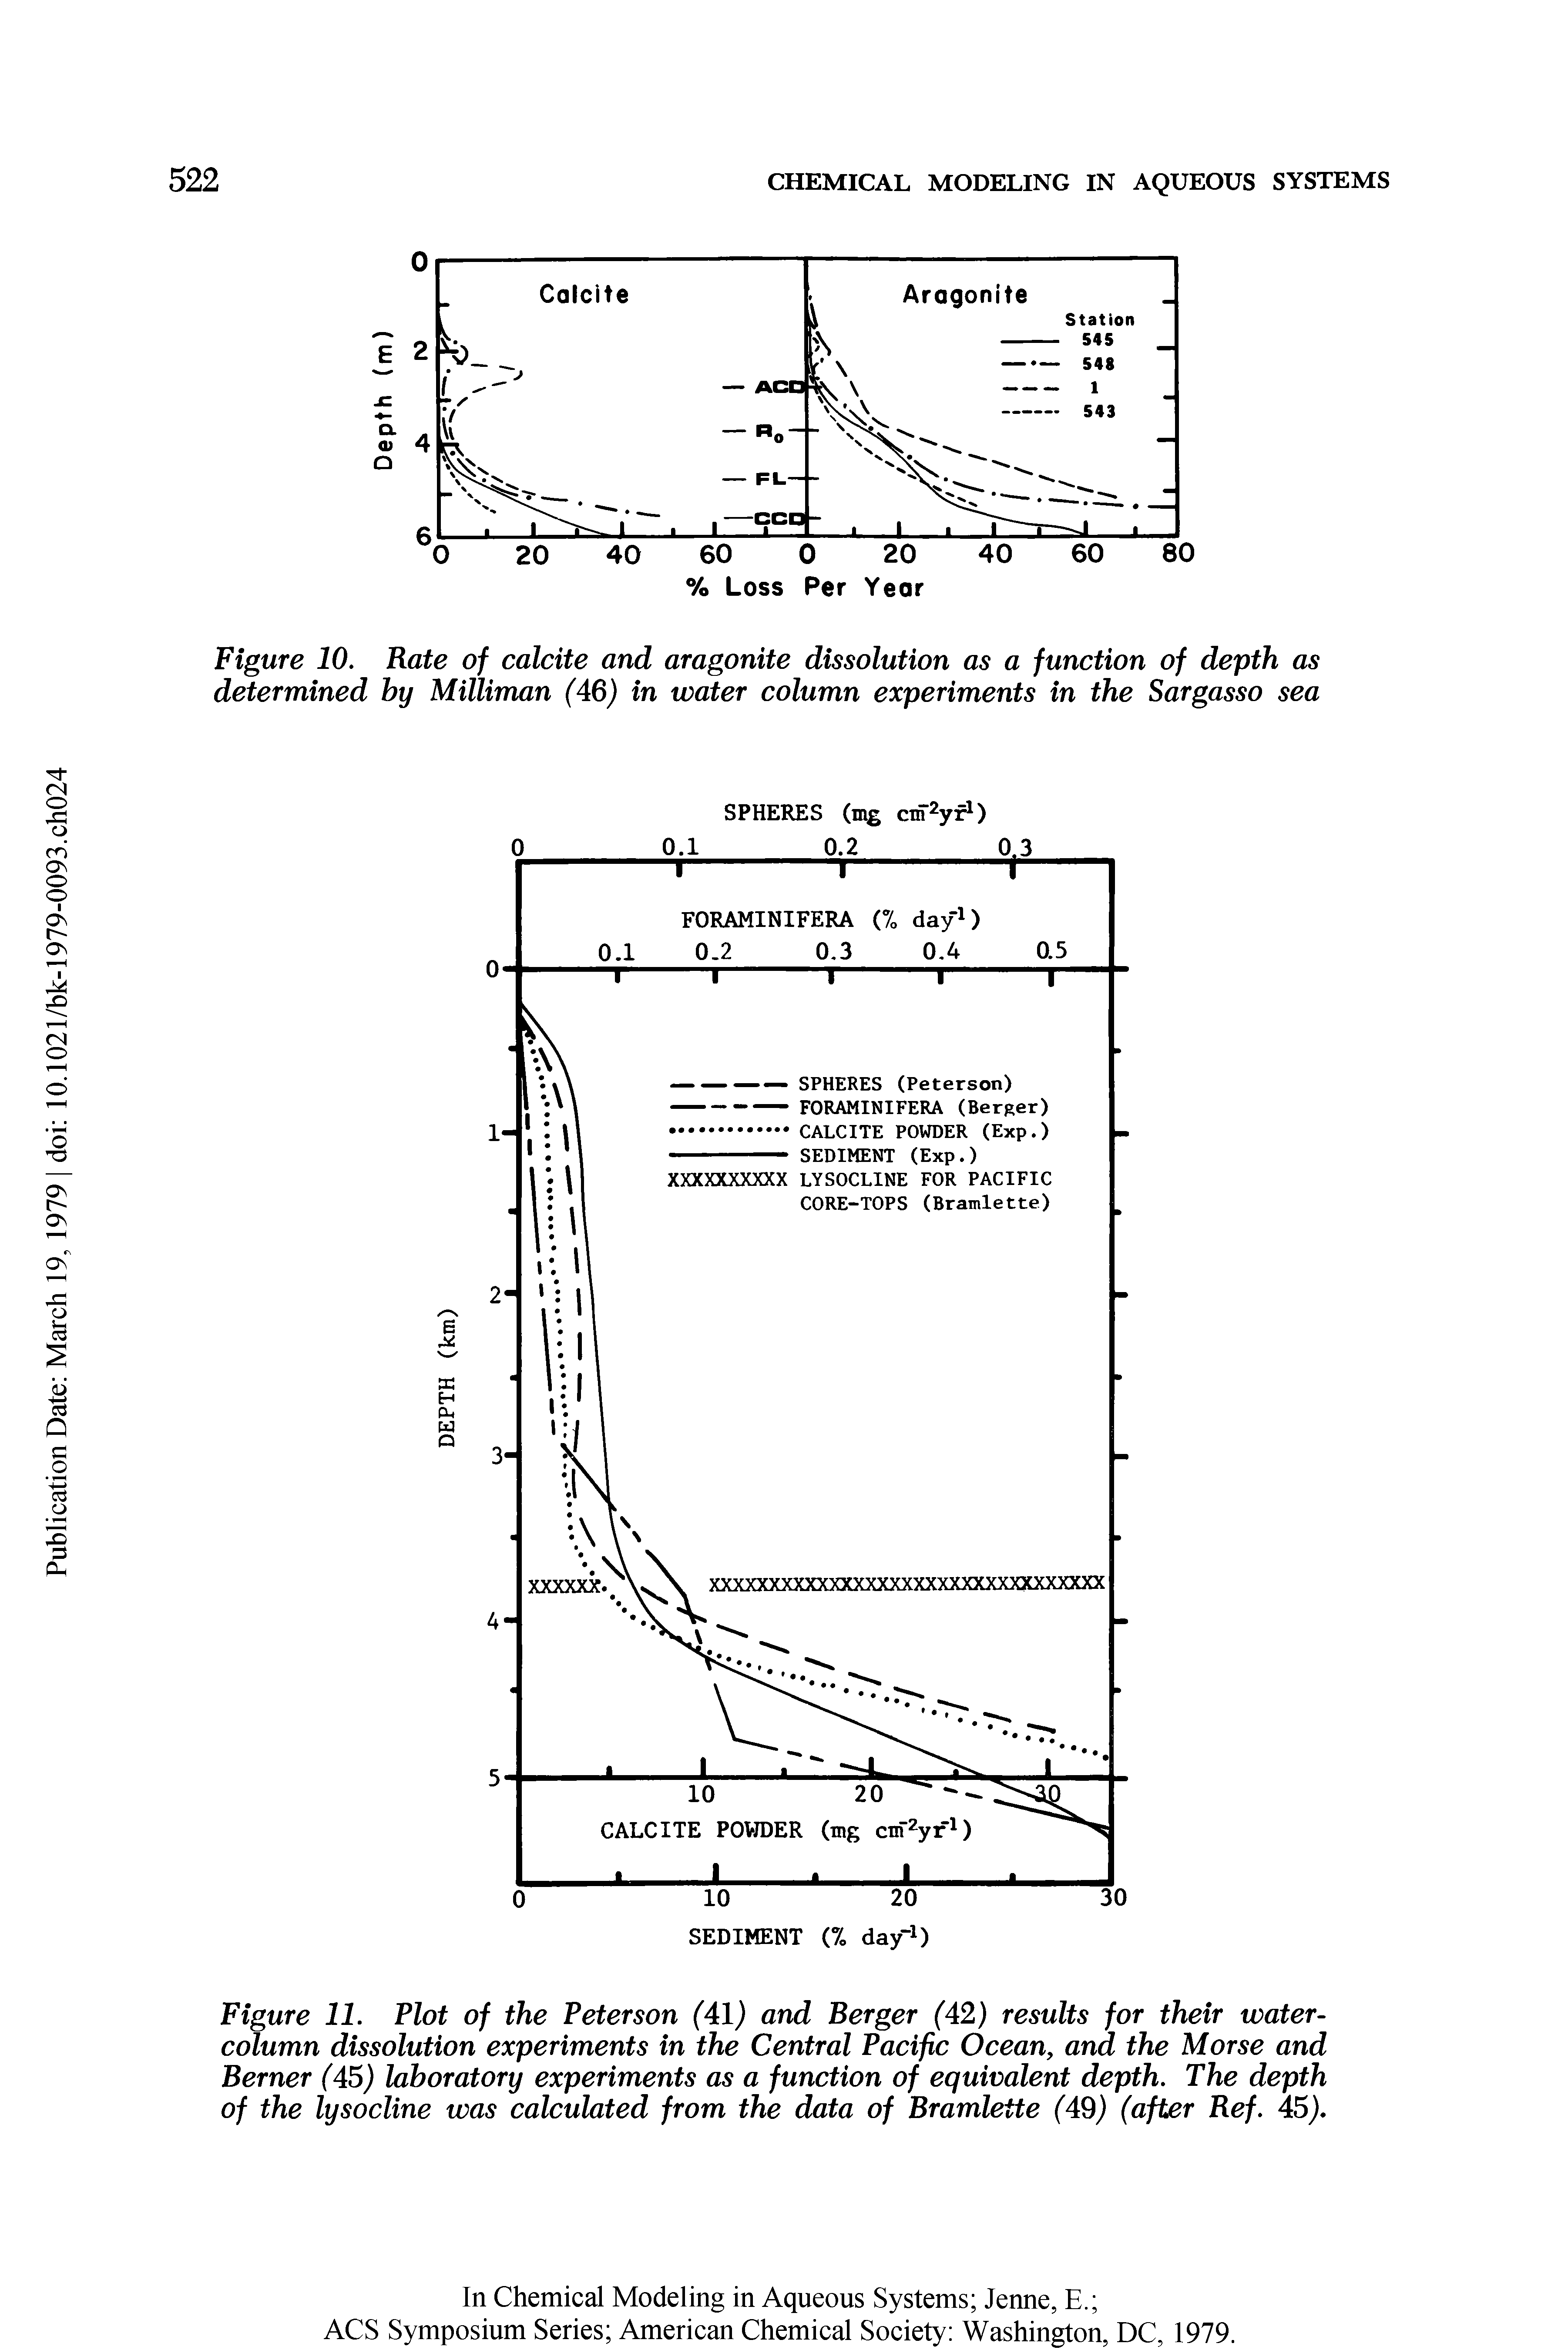 Figure 11. Plot of the Peterson (41) and Berger (42) results for their water-column dissolution experiments in the Central Pacific Ocean, and the Morse and Berner (45) laboratory experiments as a function of equivalent depth. The depth of the lysocline was calculated from the data of Bramlette (49) (after Bef. 45).